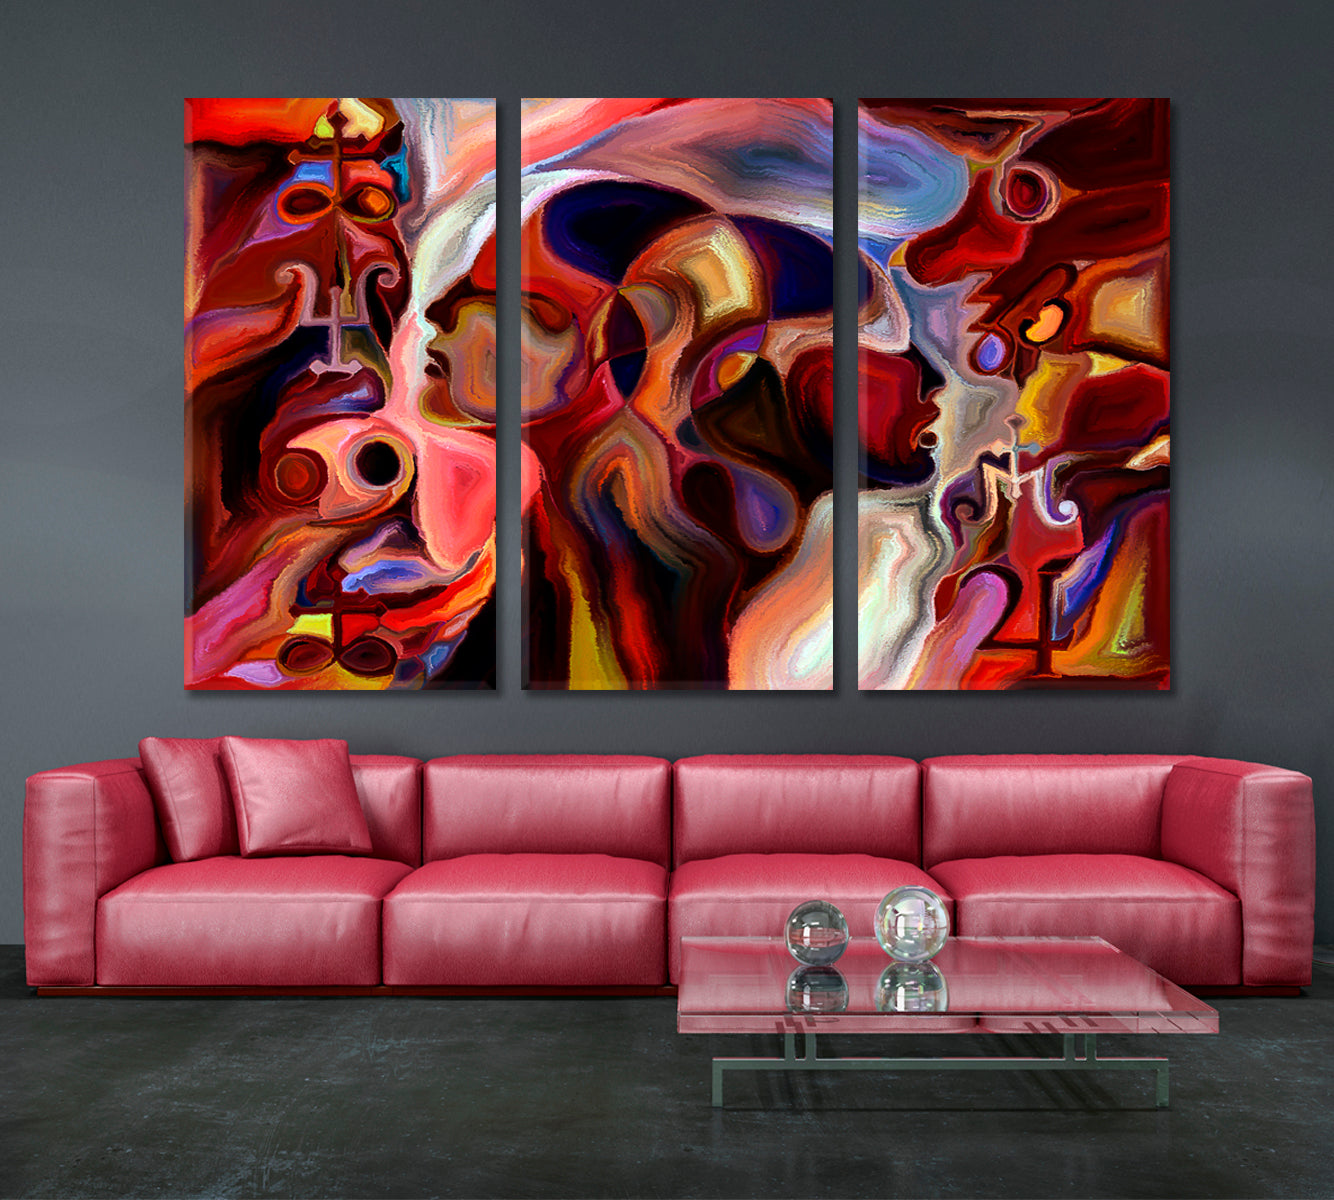 Sacred Forms of Thinking Consciousness Art Artesty 3 panels 36" x 24" 